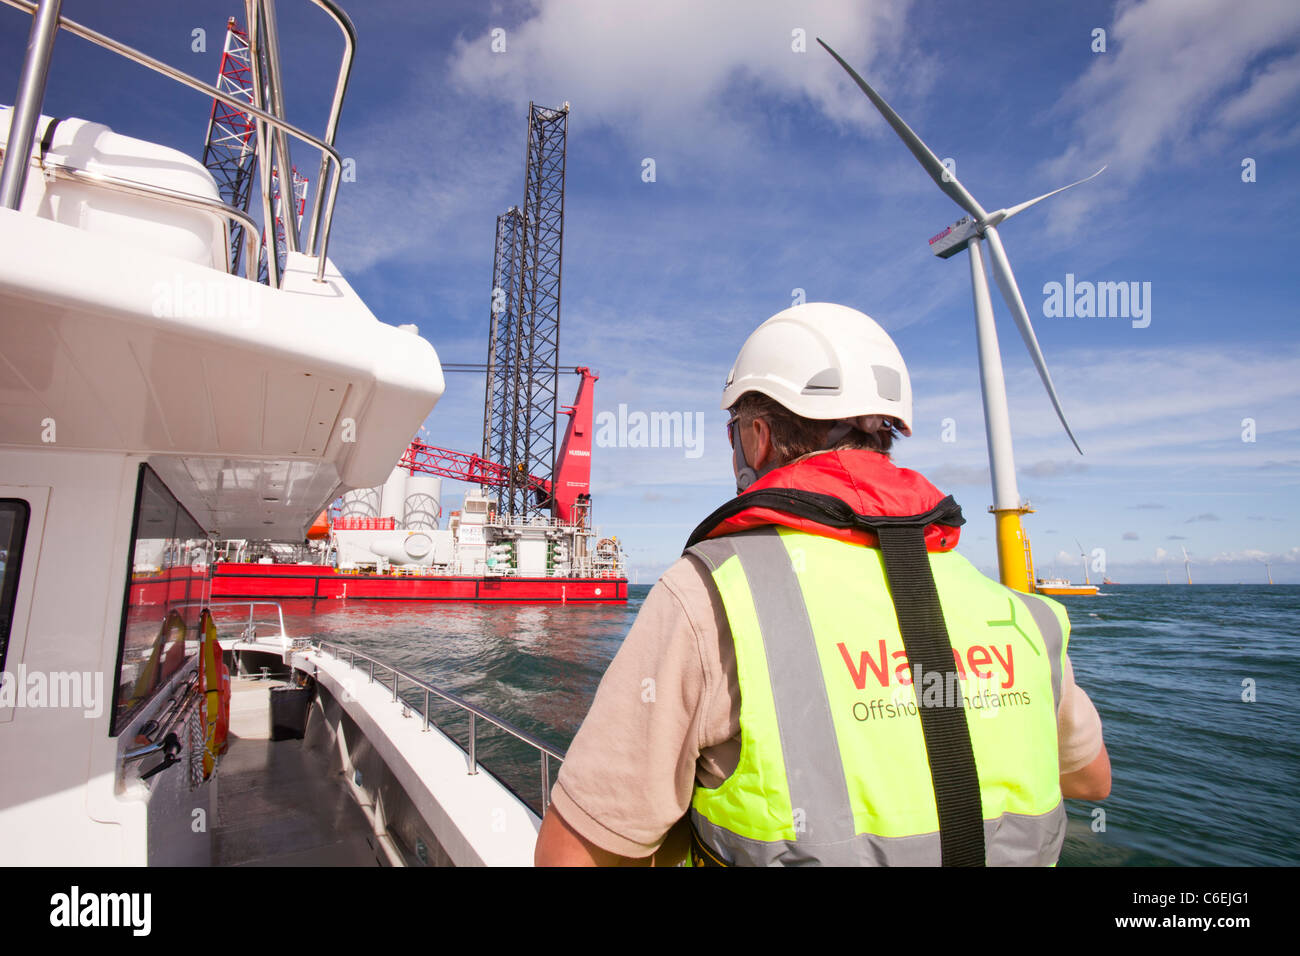 A health and safety inspector on a crew transfer vessel at the Walney offshore wind farm, Stock Photo